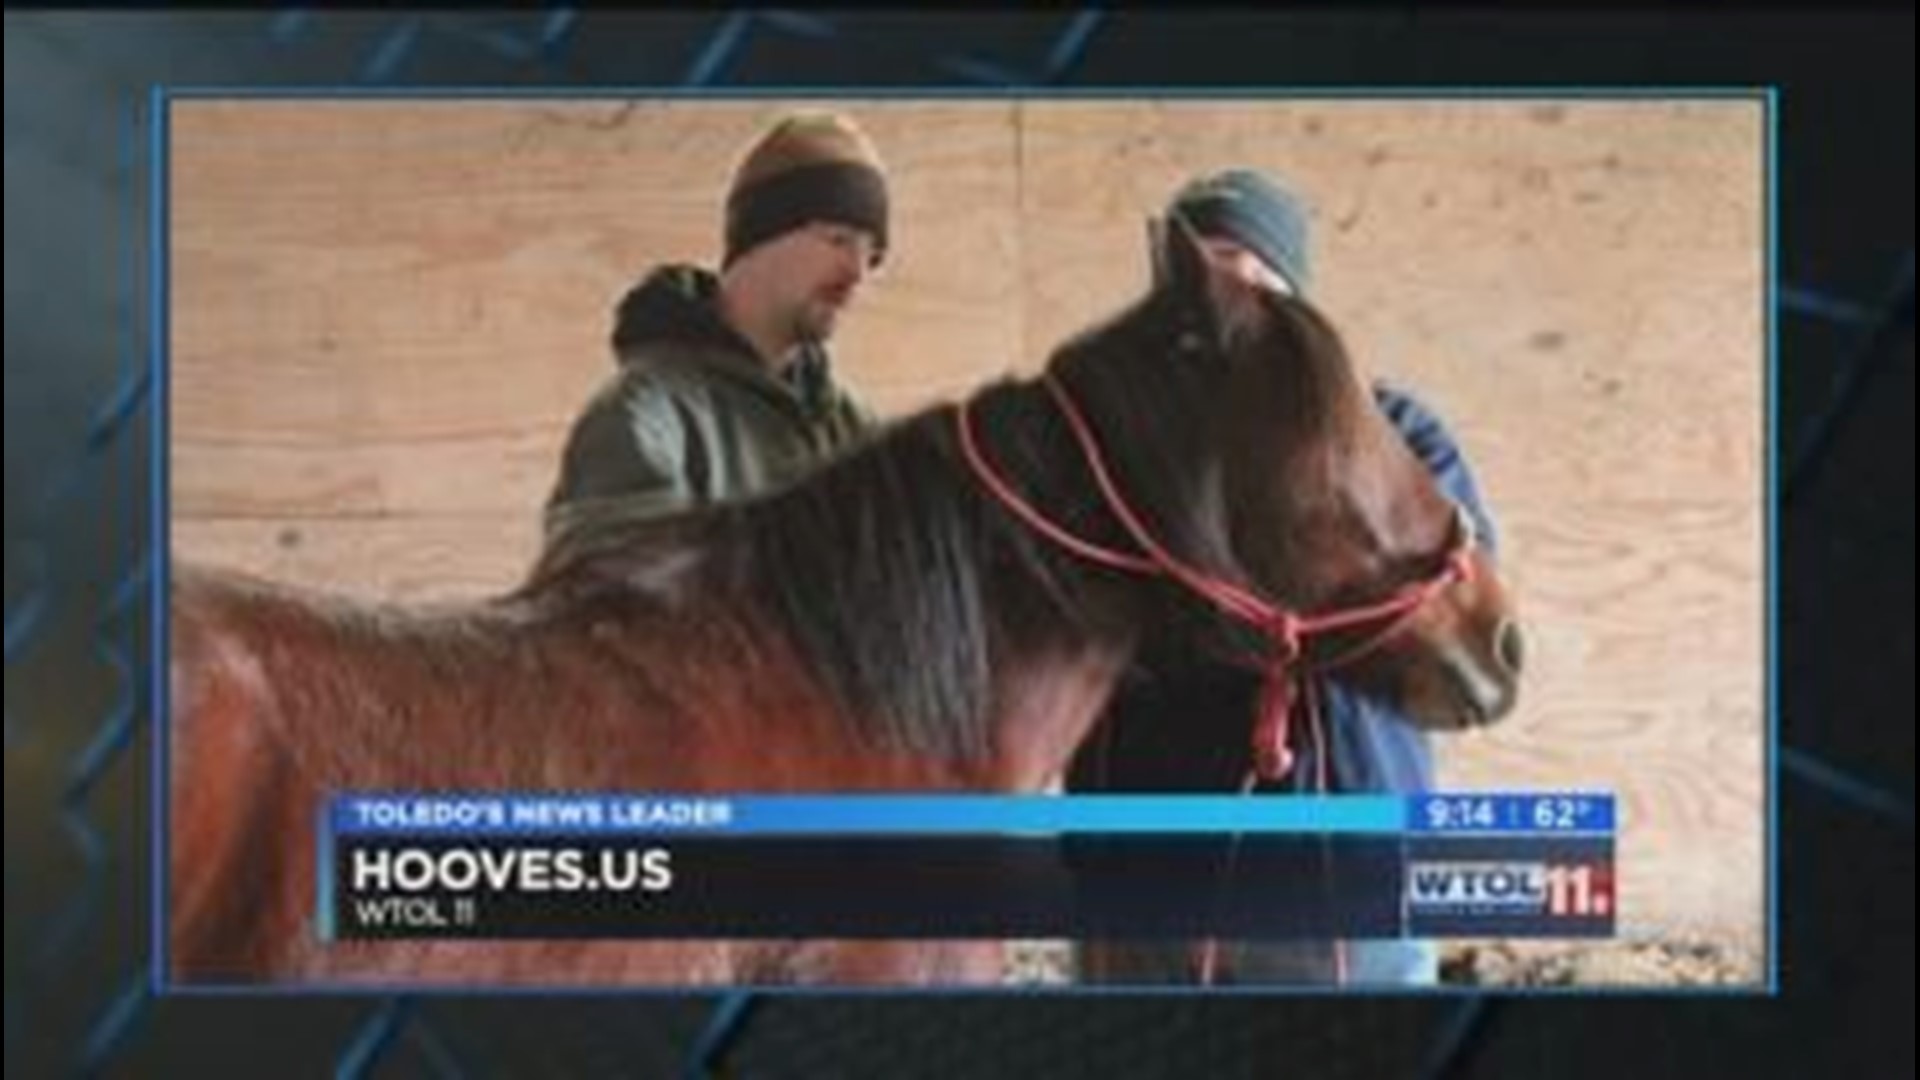 Support vets at Hogs and Hooves on WTOL 11 Your Day